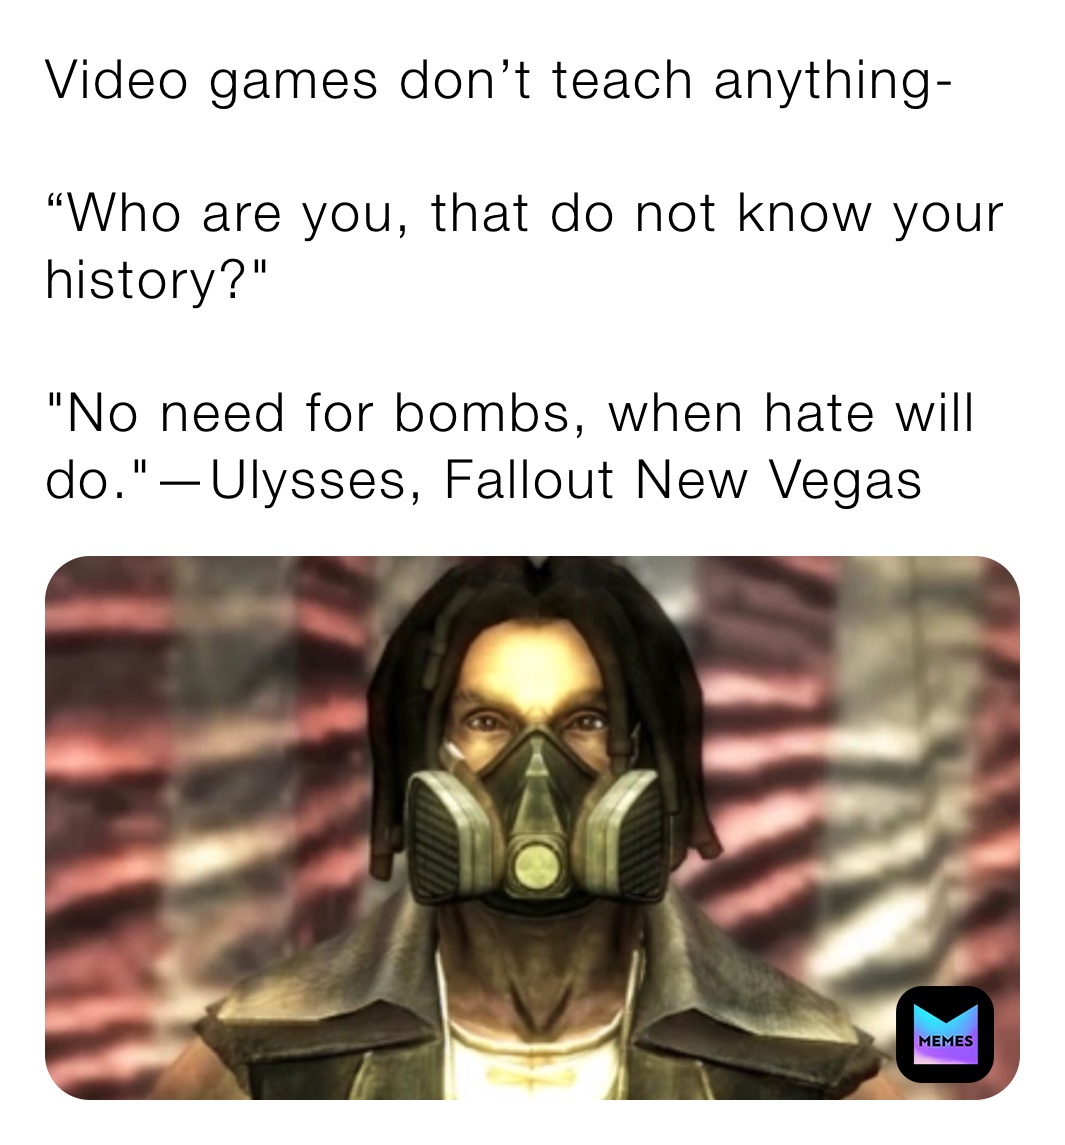 Video games don’t teach anything-

“Who are you, that do not know your history?"

"No need for bombs, when hate will do."—Ulysses, Fallout New Vegas